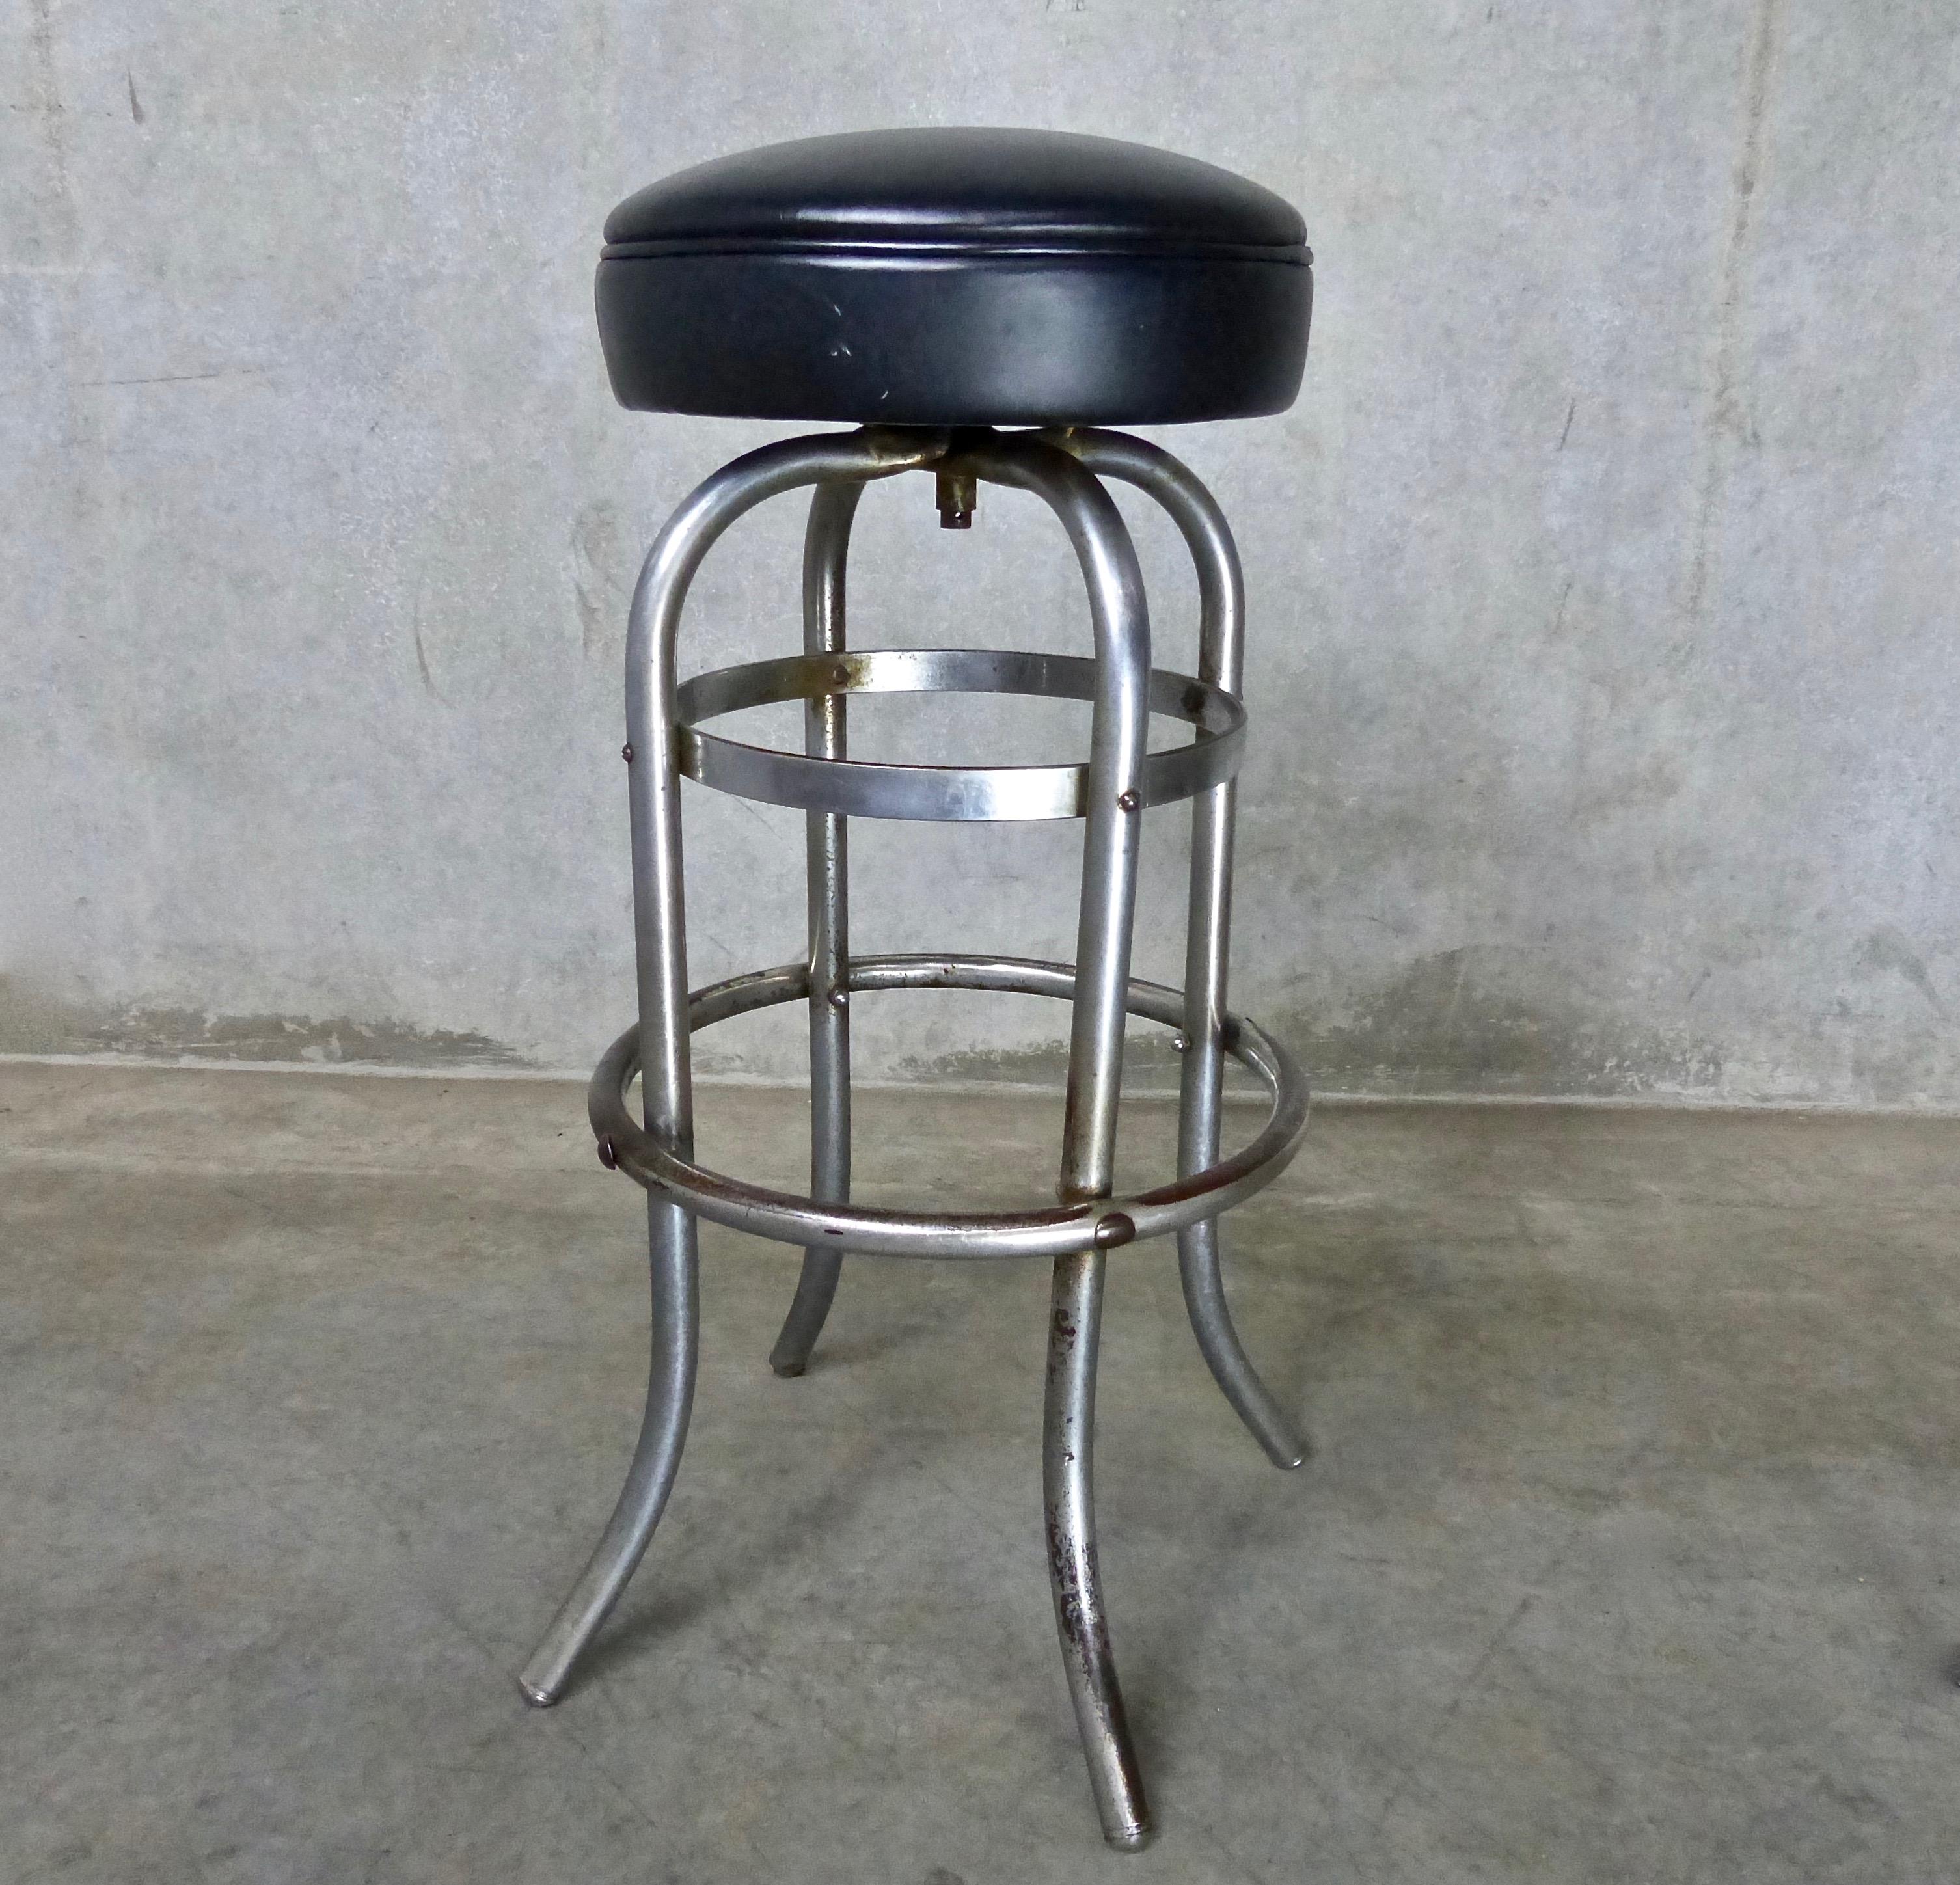 Matched pair of Mid-Century Modern, leather seat, four-legged chromed steel bar or counter stools. Made by Duro-chrome of St. Louis, Missouri. Nicely balanced, sturdy stools with well-worn foot rings. With padded, demountable swivel